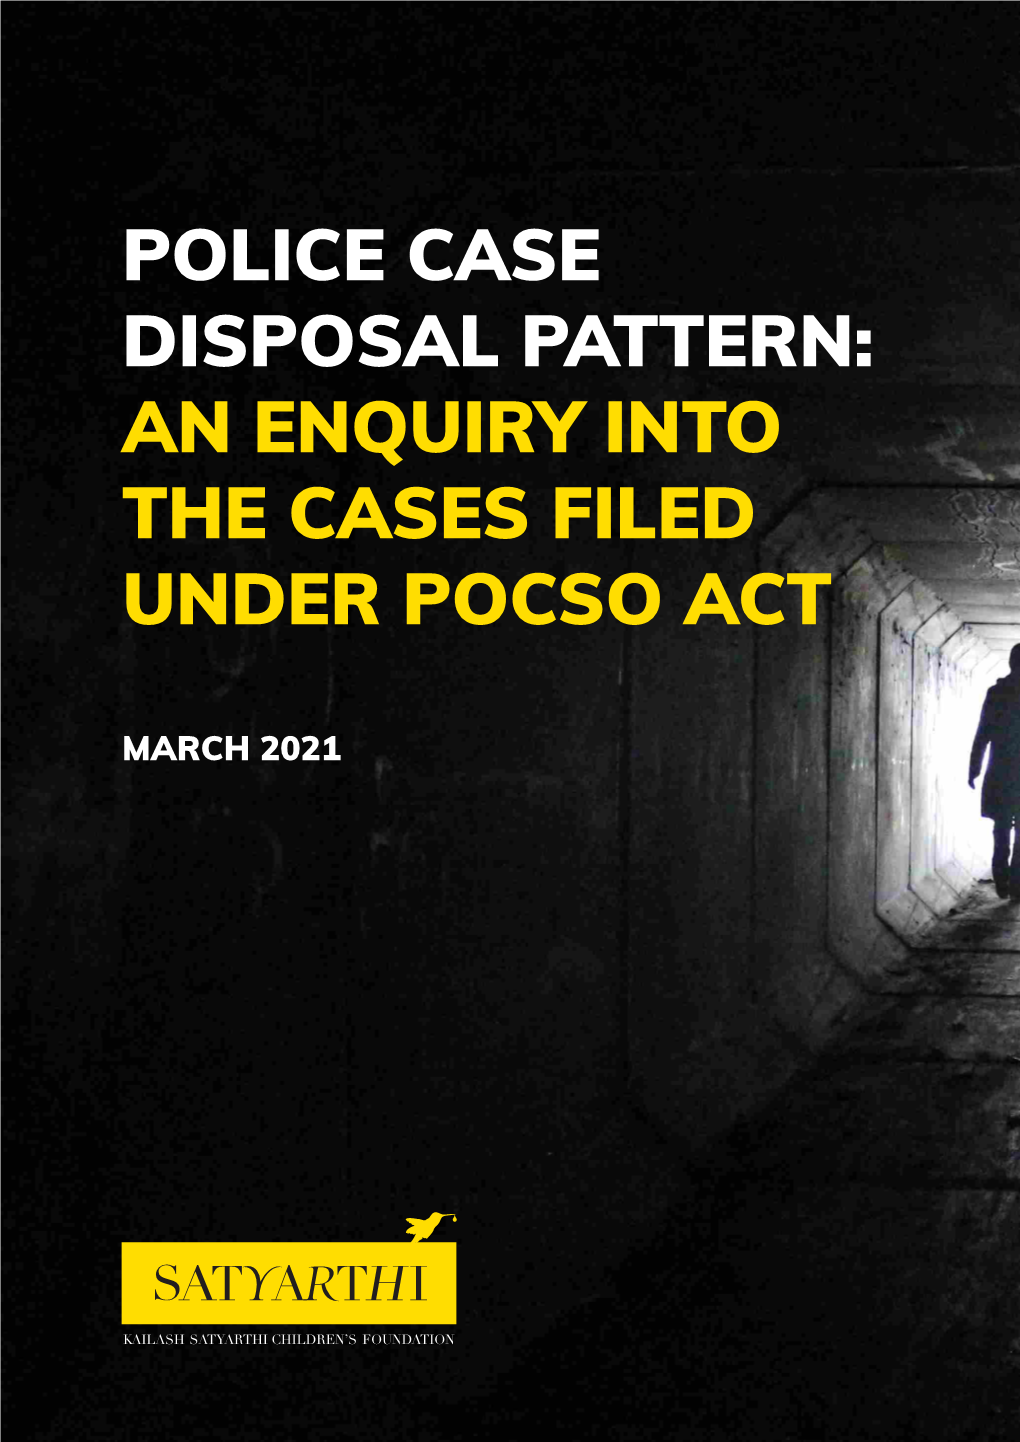 An Enquiry Into the Cases Filed Under Pocso Act